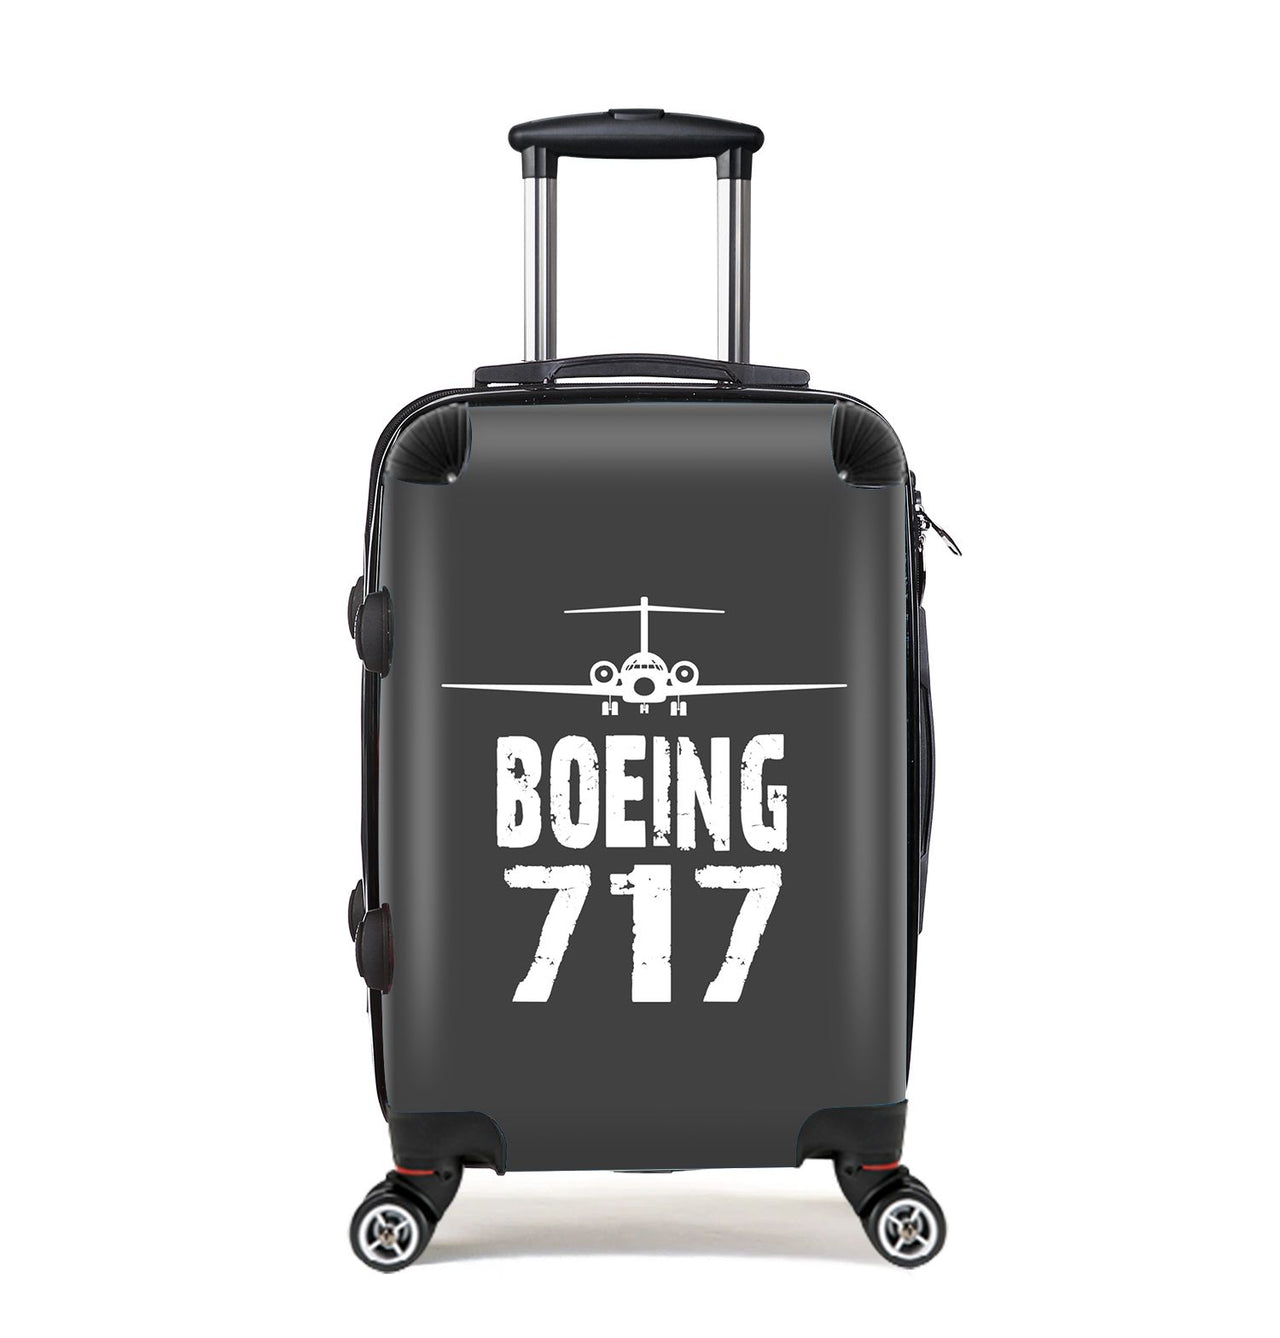 Boeing 717 & Plane Designed Cabin Size Luggages